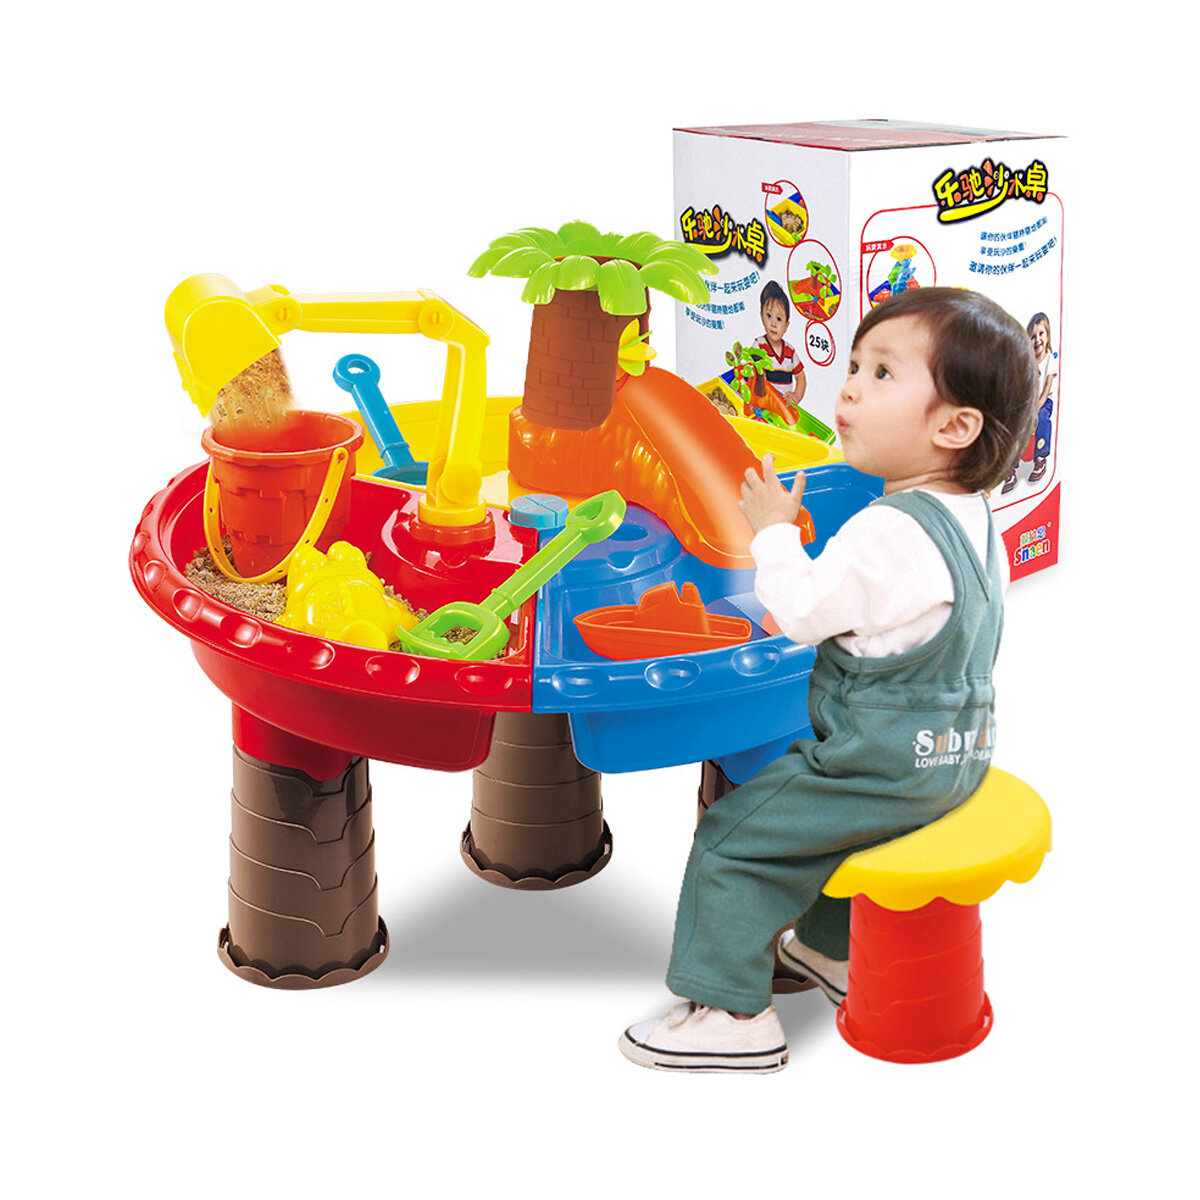 Image of 2 IN 1 Multi-style Summer Beach Sand Kids Play Water Digging Sandglass Play Sand Tool Set Toys for Kids Perfect Gift